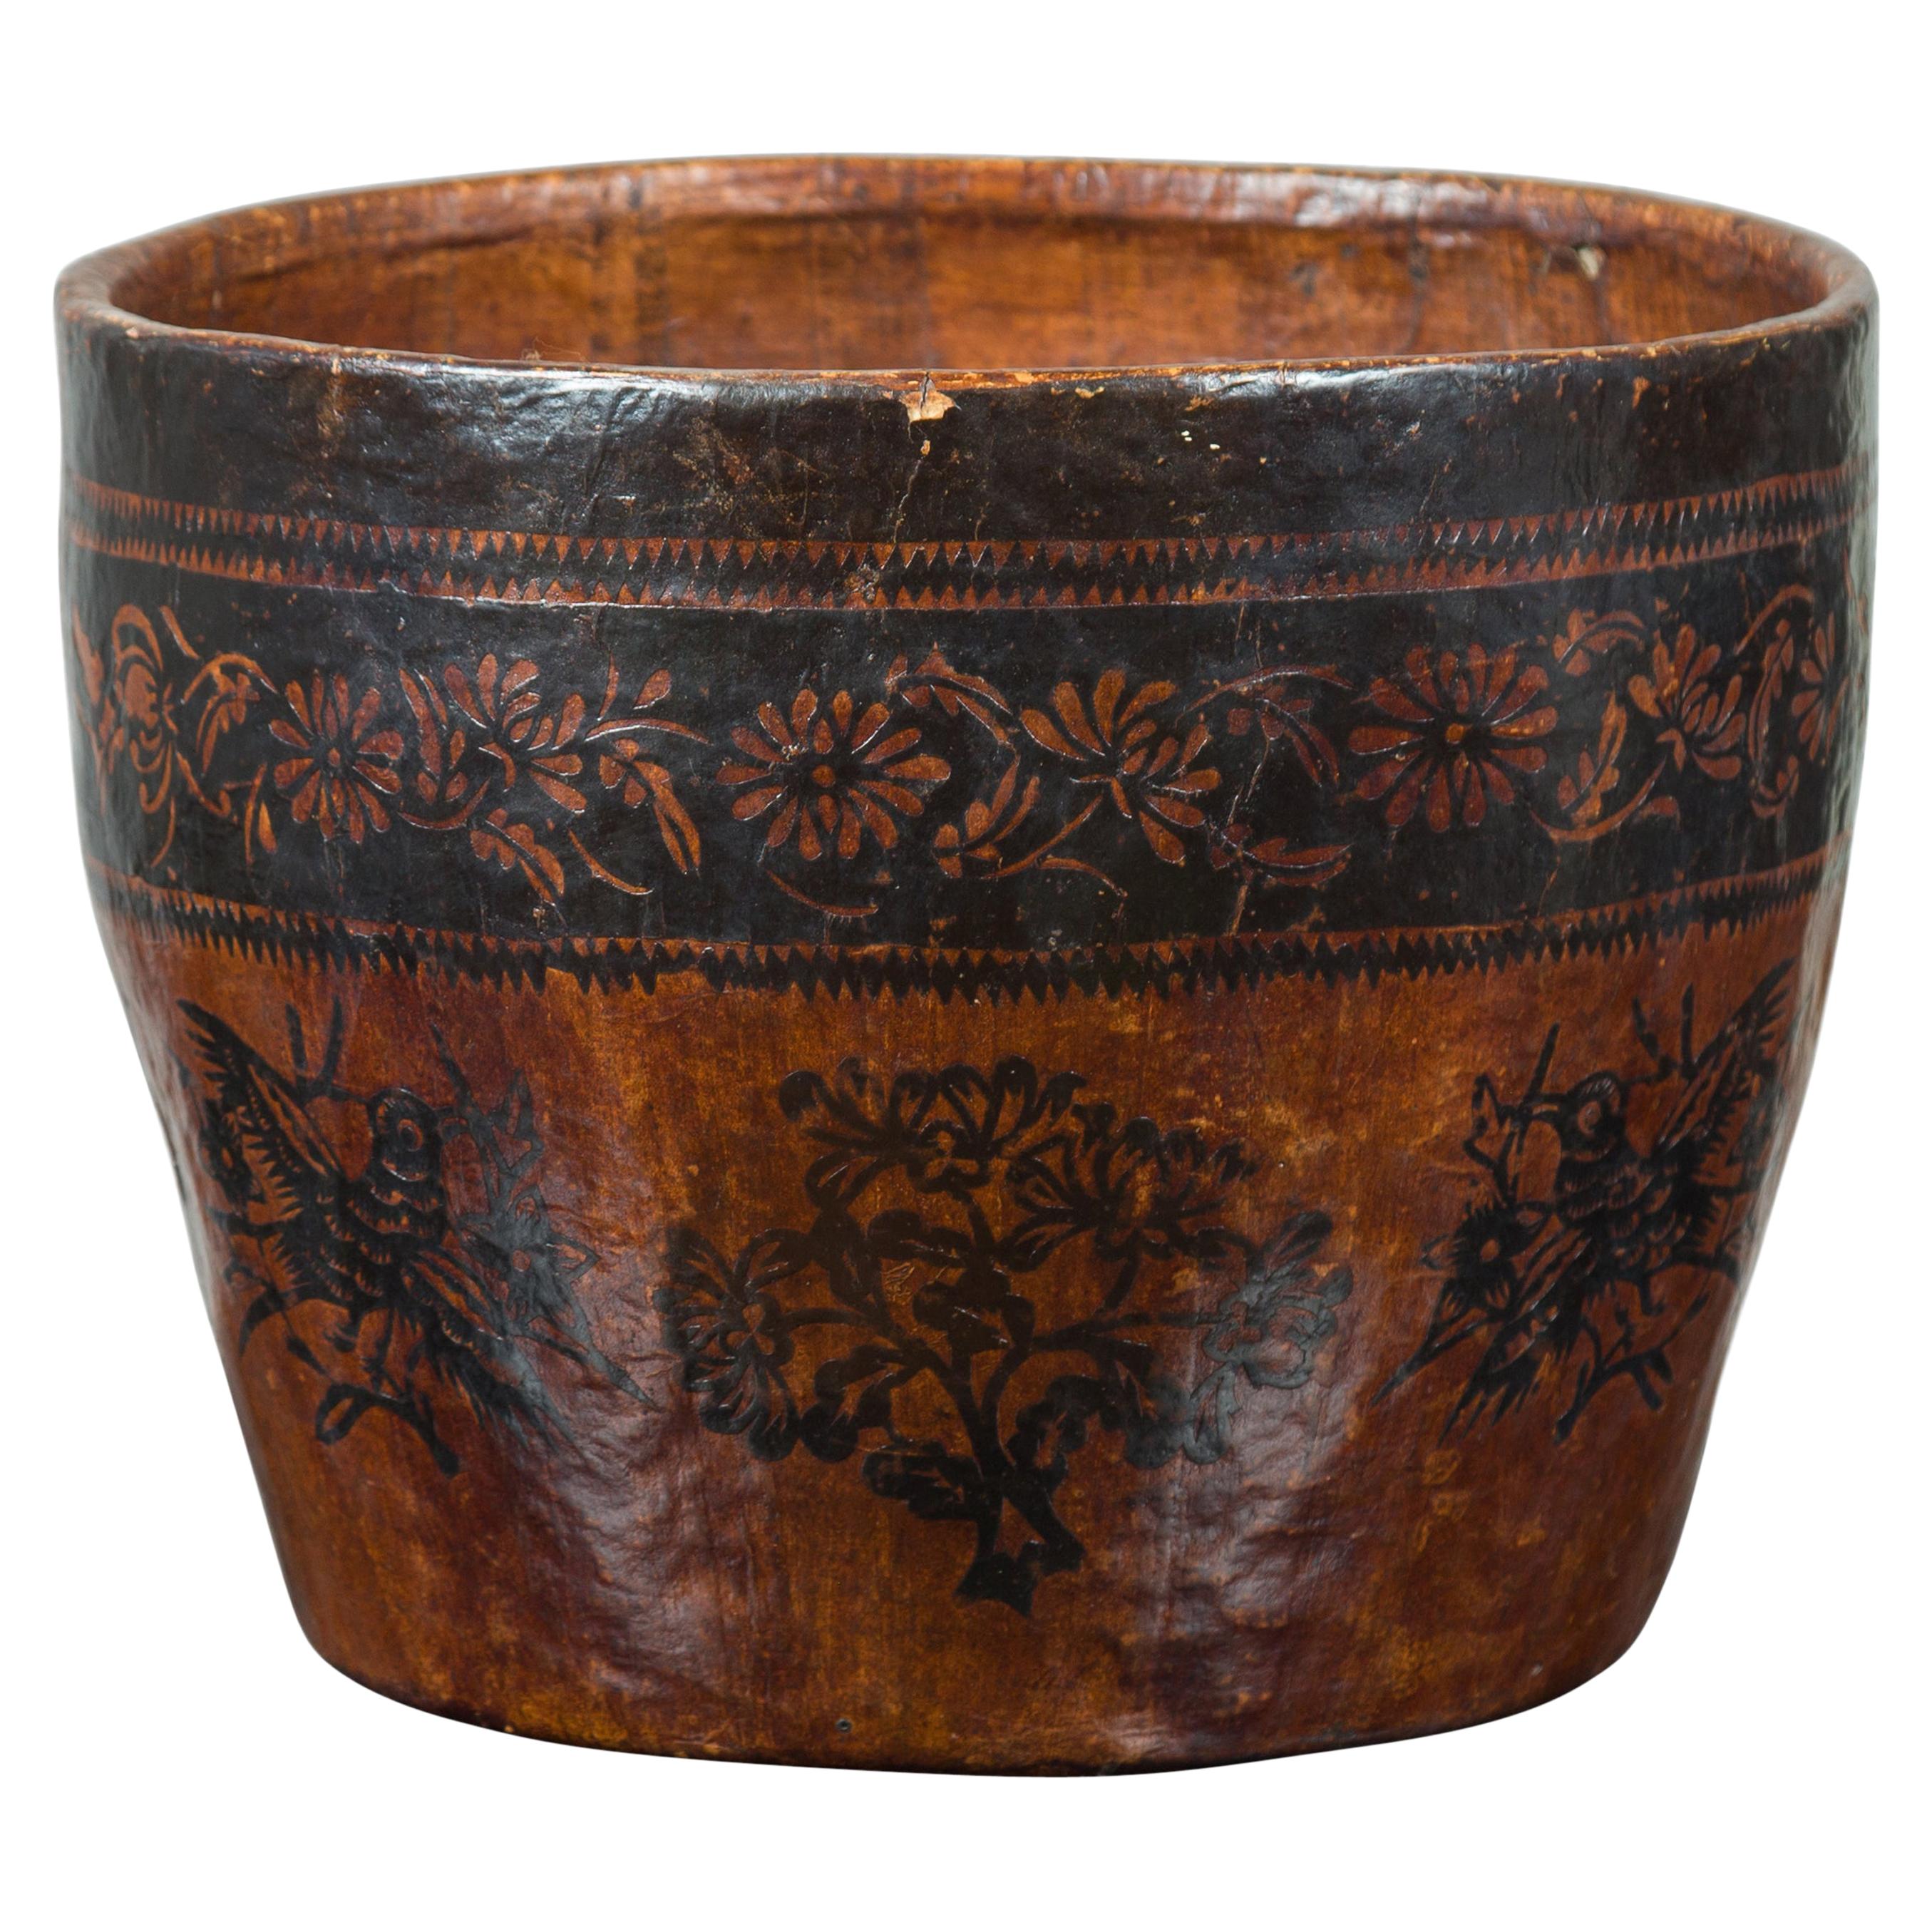 Chinese Brown and Black Papier-Mâché Basket with Floral Frieze and Bird Motifs